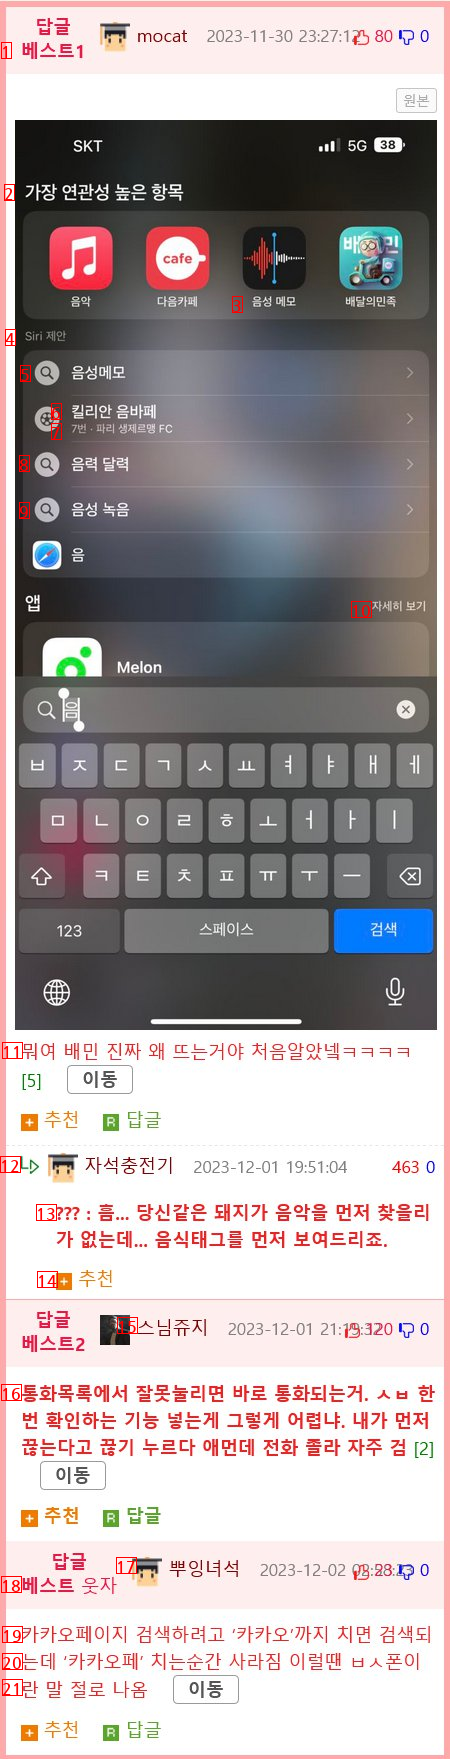 I'm using an iPhone. Is this a mobile phone that costs 1 million won or 2 million won? The reality part.jpg